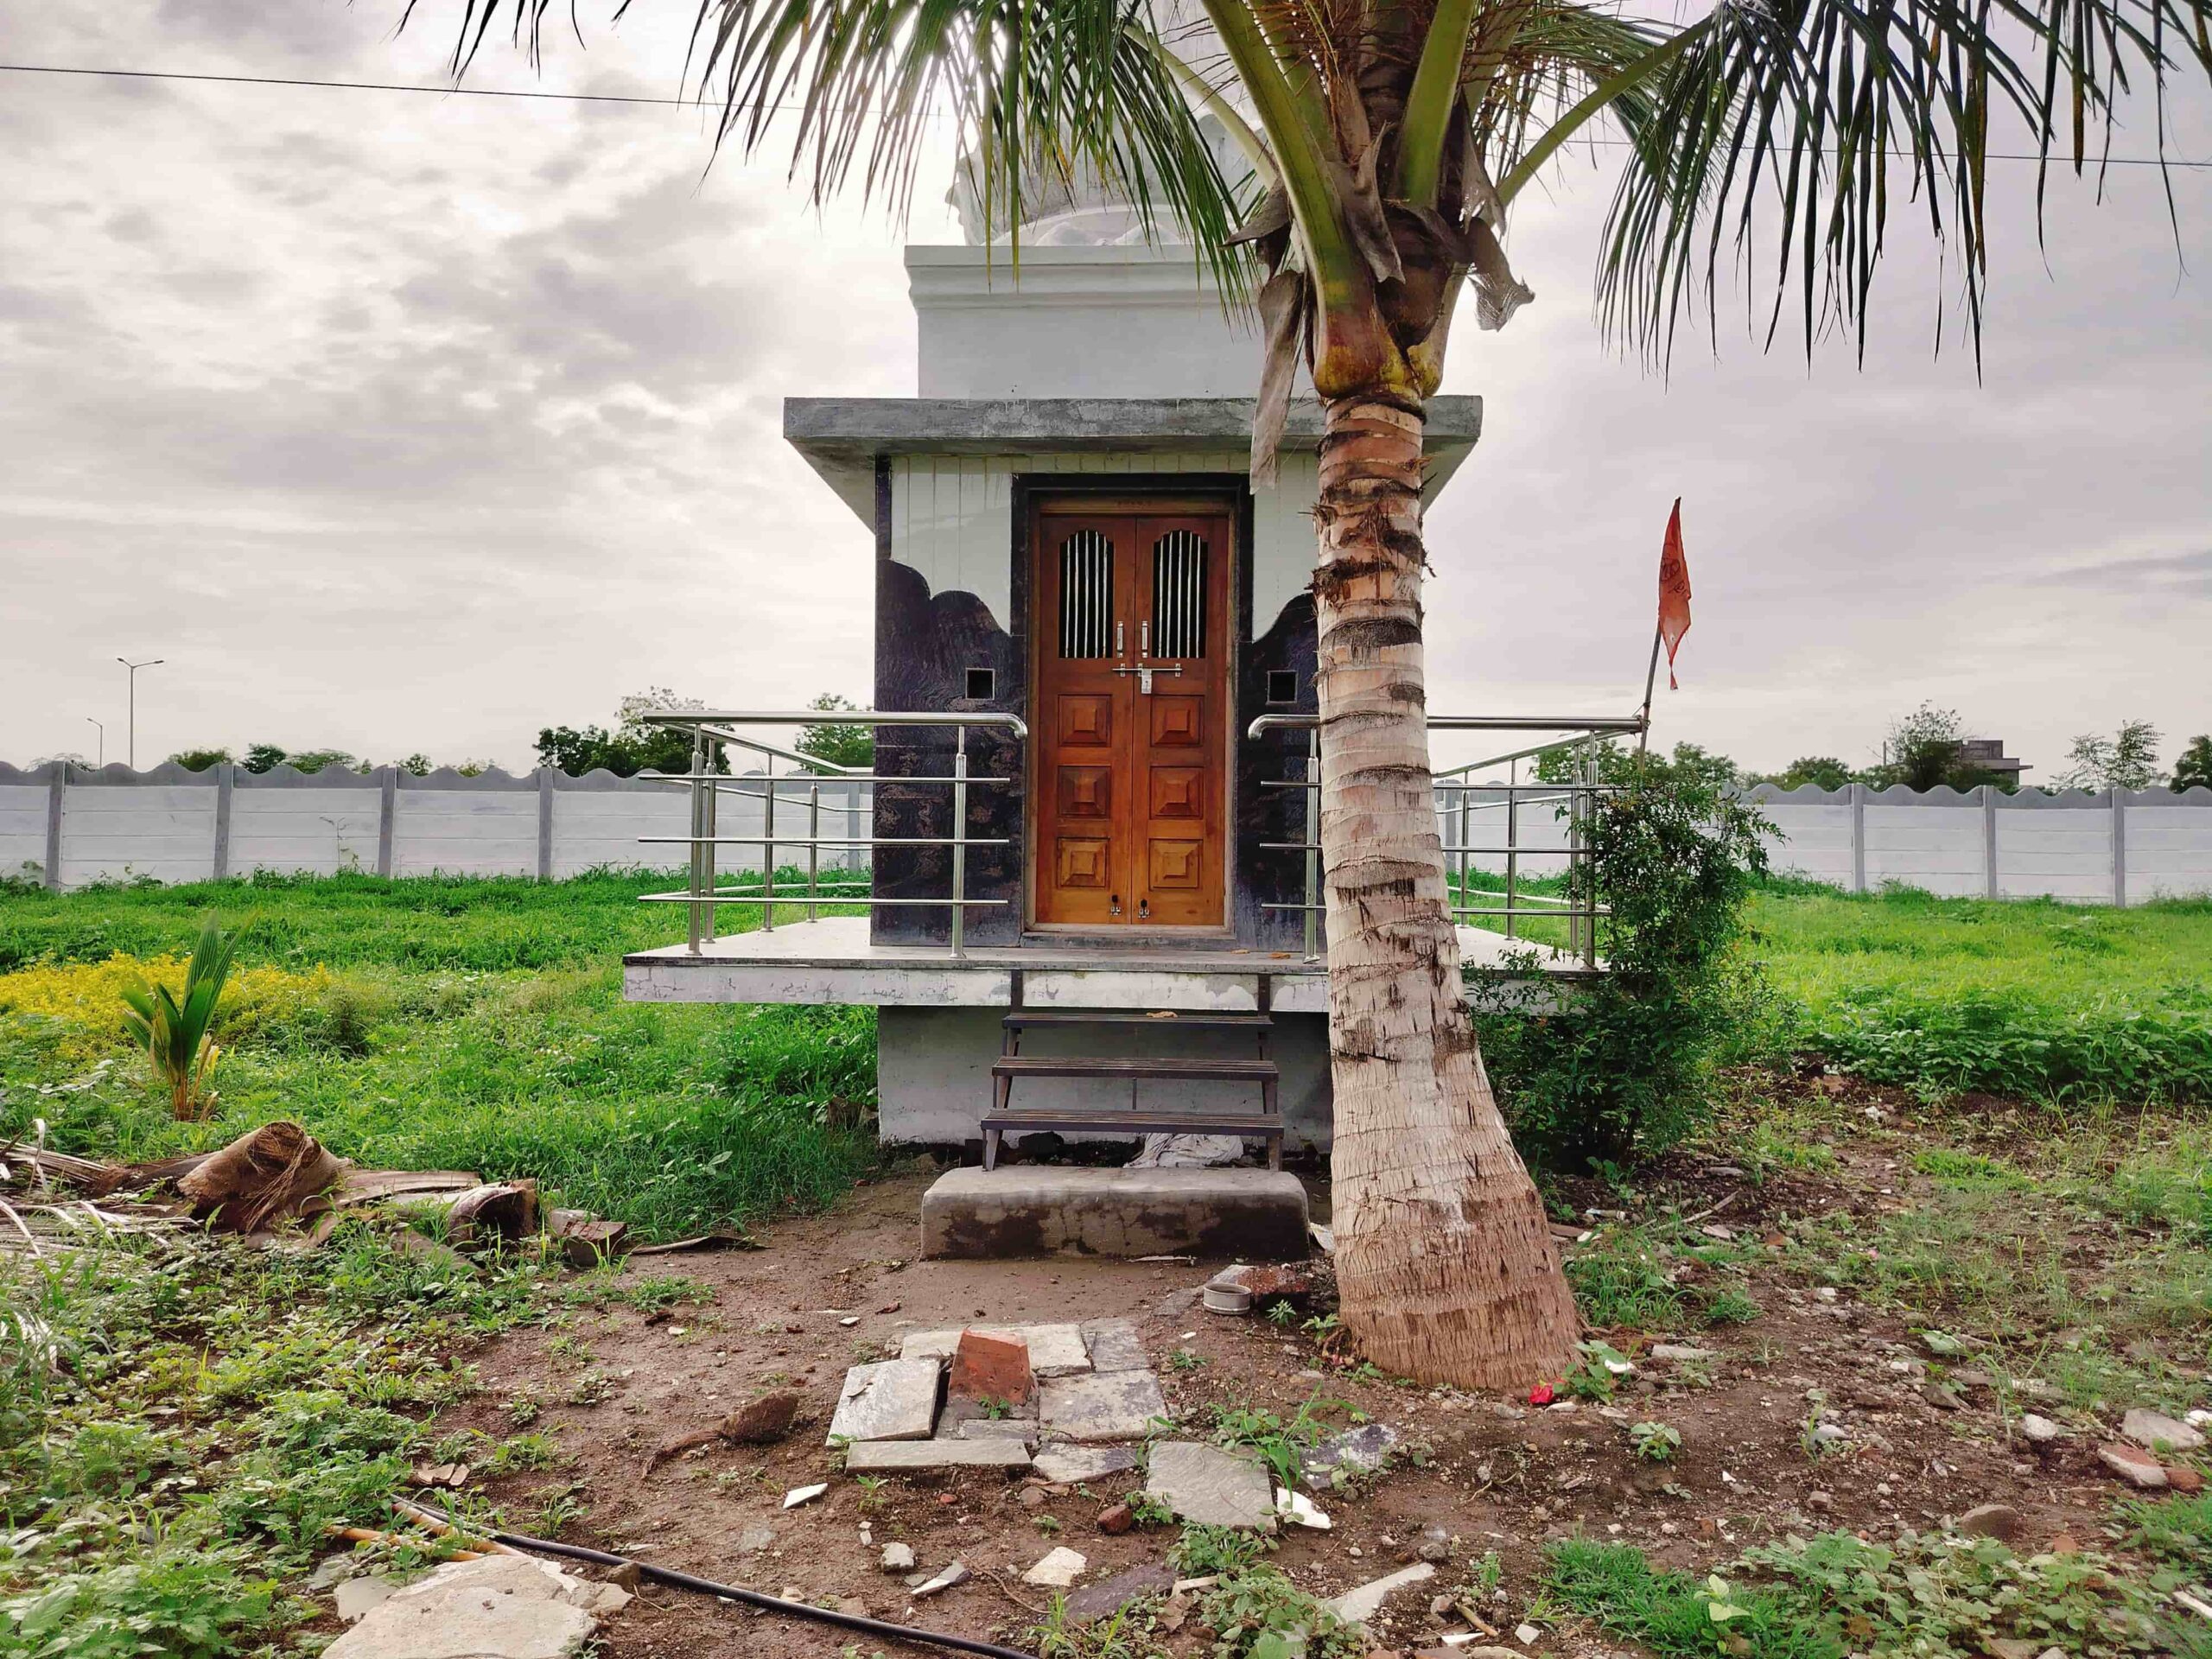 A small mahalaxmi temple in a field at Venkateshwara City in Vasant Vihar, Solapur. This image is from the website of Solaput Property, a real estate agency in Solapur.